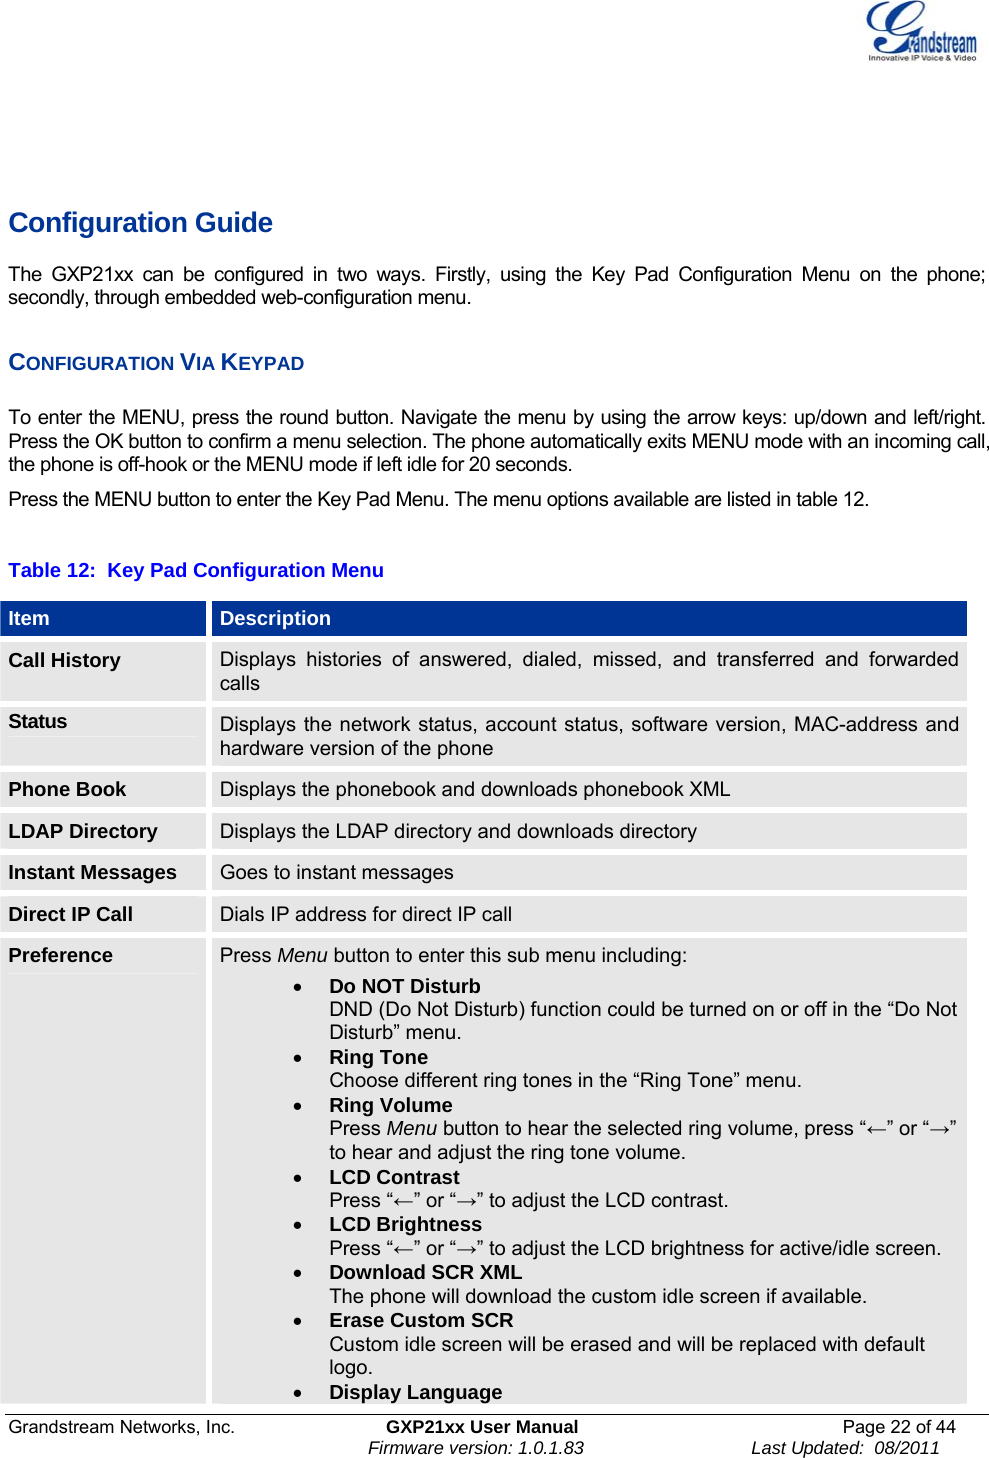  Grandstream Networks, Inc.  GXP21xx User Manual  Page 22 of 44                                                                Firmware version: 1.0.1.83                                 Last Updated:  08/2011    Configuration Guide The GXP21xx can be configured in two ways. Firstly, using the Key Pad Configuration Menu on the phone; secondly, through embedded web-configuration menu.  CONFIGURATION VIA KEYPAD  To enter the MENU, press the round button. Navigate the menu by using the arrow keys: up/down and left/right. Press the OK button to confirm a menu selection. The phone automatically exits MENU mode with an incoming call, the phone is off-hook or the MENU mode if left idle for 20 seconds. Press the MENU button to enter the Key Pad Menu. The menu options available are listed in table 12.  Table 12:  Key Pad Configuration Menu Item  Description Call History  Displays histories of answered, dialed, missed, and transferred and forwarded calls Status  Displays the network status, account status, software version, MAC-address and hardware version of the phone Phone Book  Displays the phonebook and downloads phonebook XML LDAP Directory  Displays the LDAP directory and downloads directory Instant Messages  Goes to instant messages Direct IP Call  Dials IP address for direct IP call Preference  Press Menu button to enter this sub menu including: • Do NOT Disturb DND (Do Not Disturb) function could be turned on or off in the “Do Not Disturb” menu. • Ring Tone Choose different ring tones in the “Ring Tone” menu. • Ring Volume Press Menu button to hear the selected ring volume, press “←” or “→” to hear and adjust the ring tone volume. • LCD Contrast Press “←” or “→” to adjust the LCD contrast. • LCD Brightness Press “←” or “→” to adjust the LCD brightness for active/idle screen. • Download SCR XML The phone will download the custom idle screen if available. • Erase Custom SCR Custom idle screen will be erased and will be replaced with default logo. • Display Language 